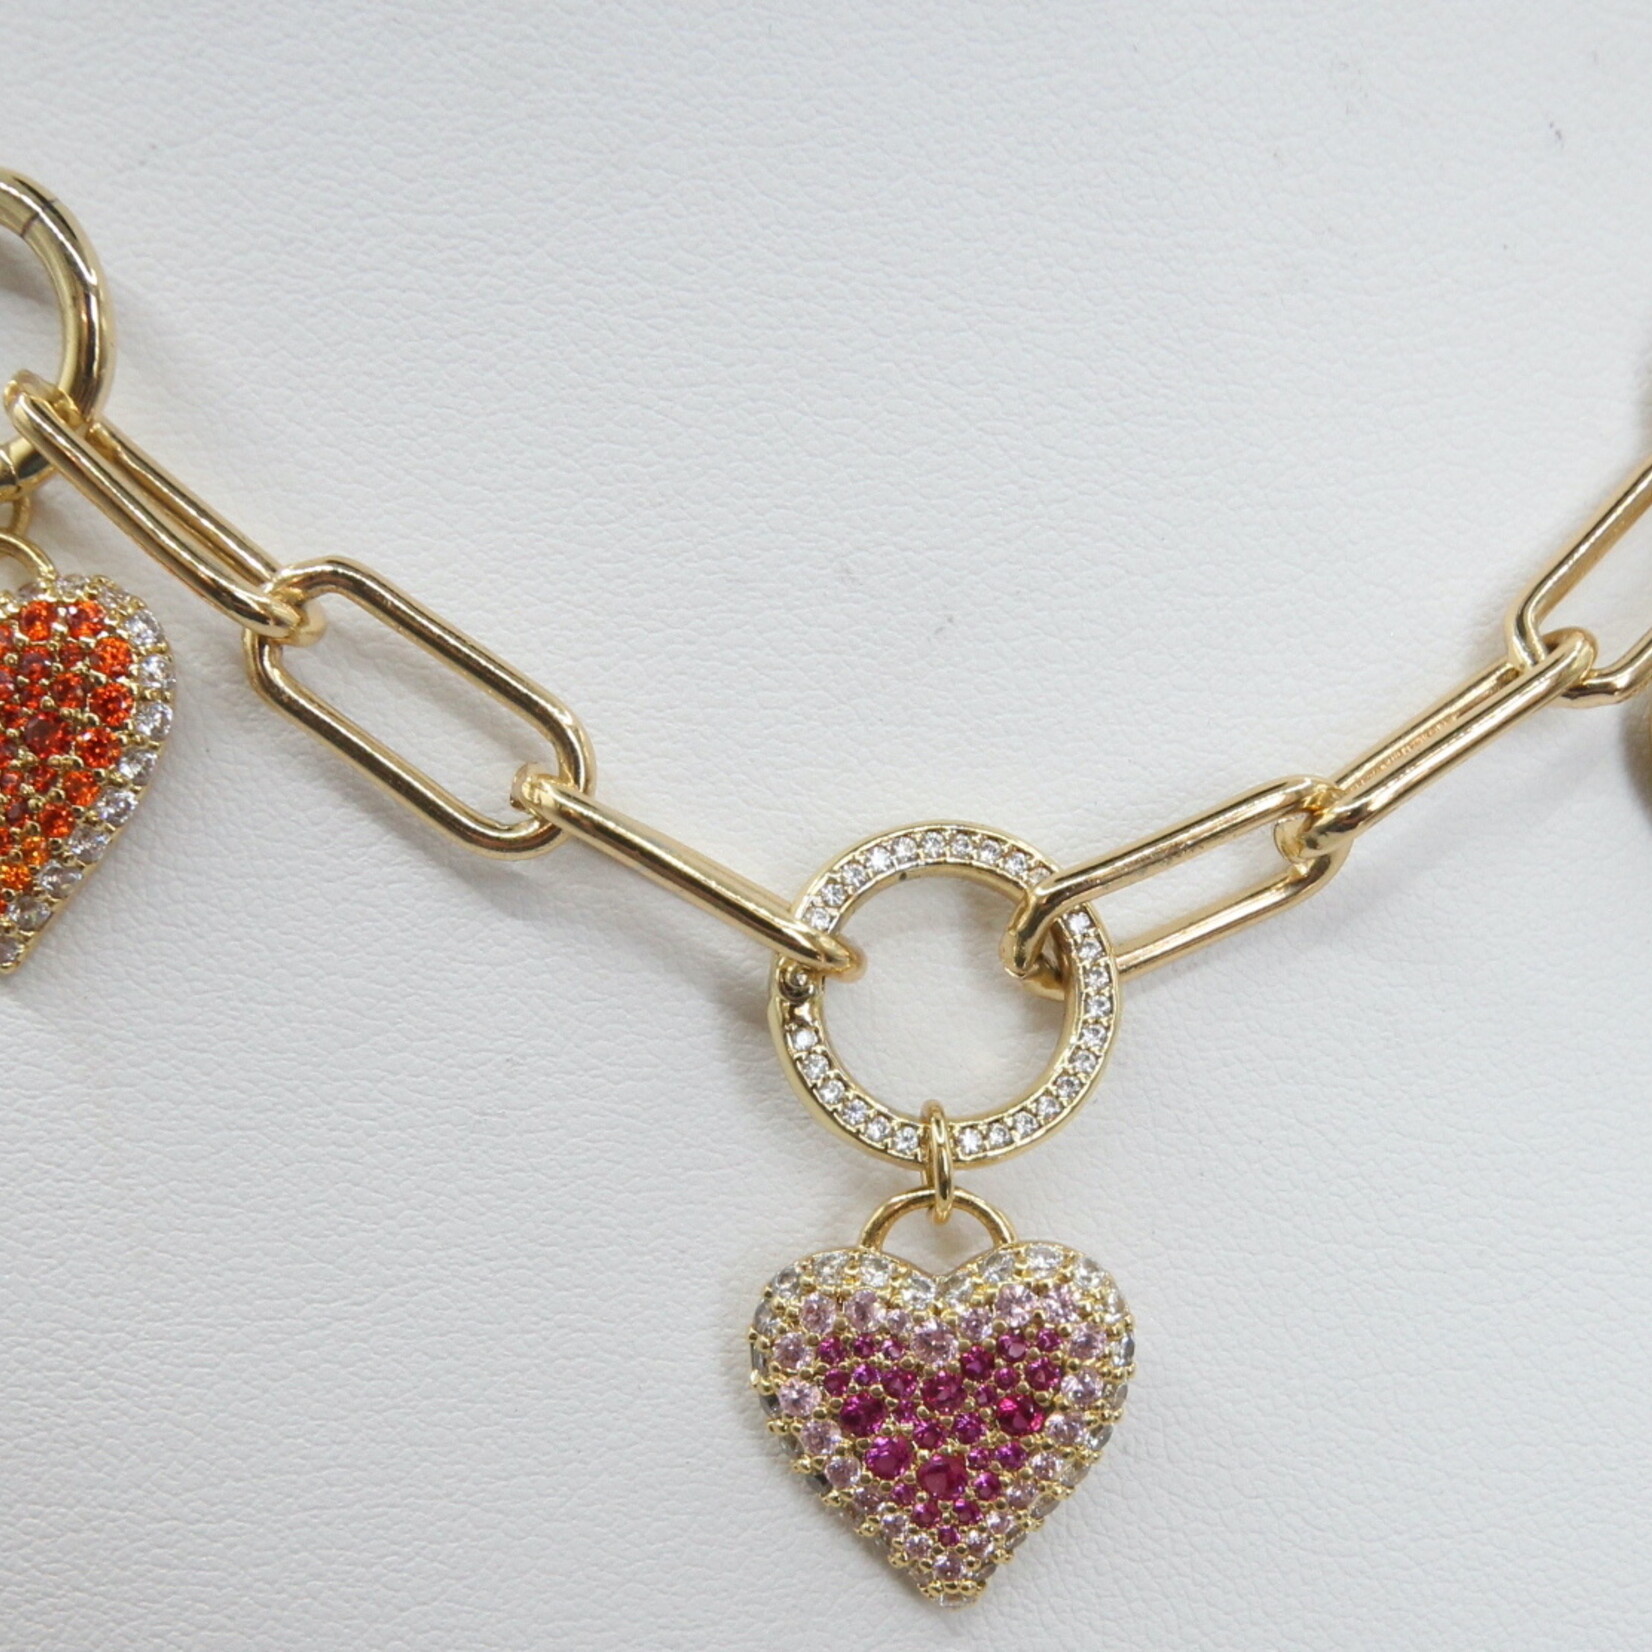 Buy Italian 10K Yellow Gold Polished Heart Link Necklace 18 Inches 2.75  Grams at ShopLC.